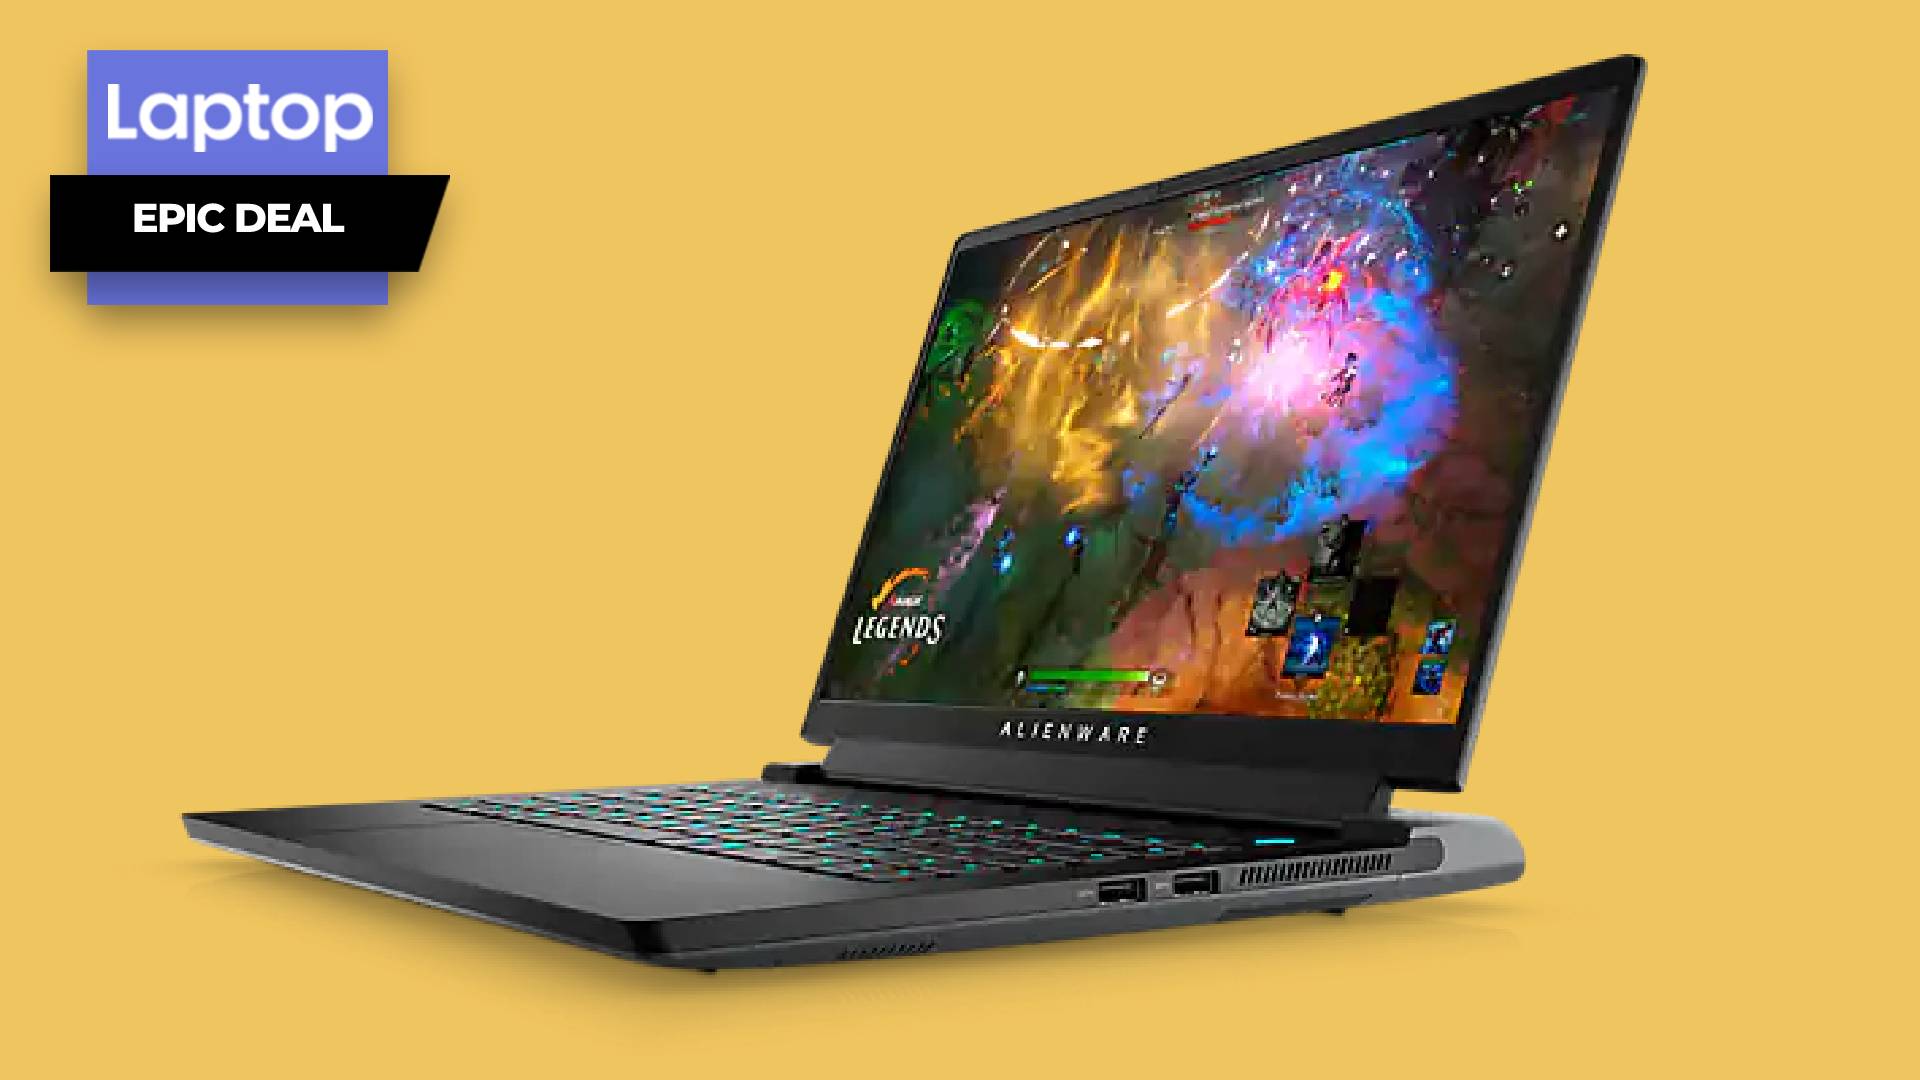 Alienware m15 R5 Ryzen Edition gaming rig with RTX 3060 GPU falls to $1,179  | Laptop Mag